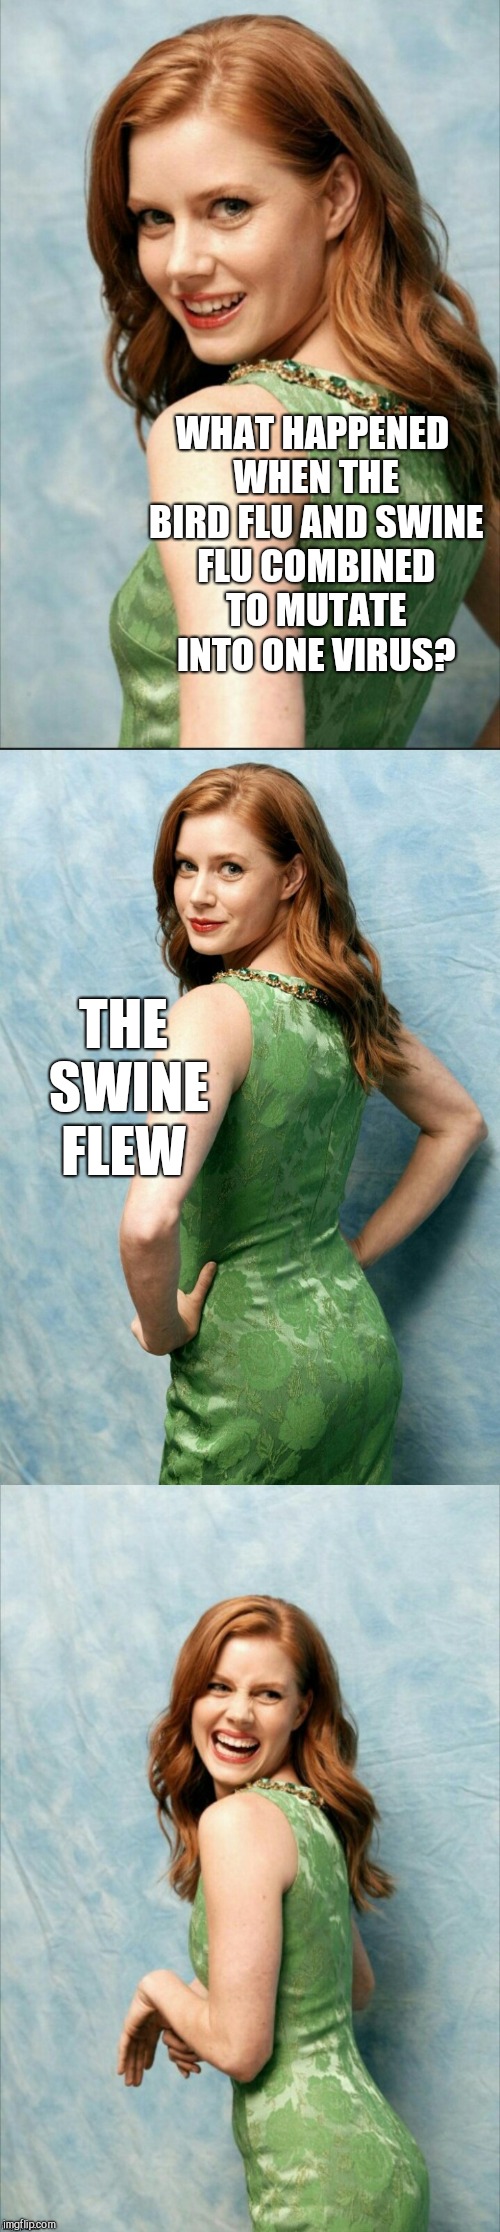 Amy Adams joke template  | WHAT HAPPENED WHEN THE BIRD FLU AND SWINE FLU COMBINED TO MUTATE INTO ONE VIRUS? THE SWINE FLEW | image tagged in amy adams joke template,jbmemegeek,amy adams,bad puns | made w/ Imgflip meme maker